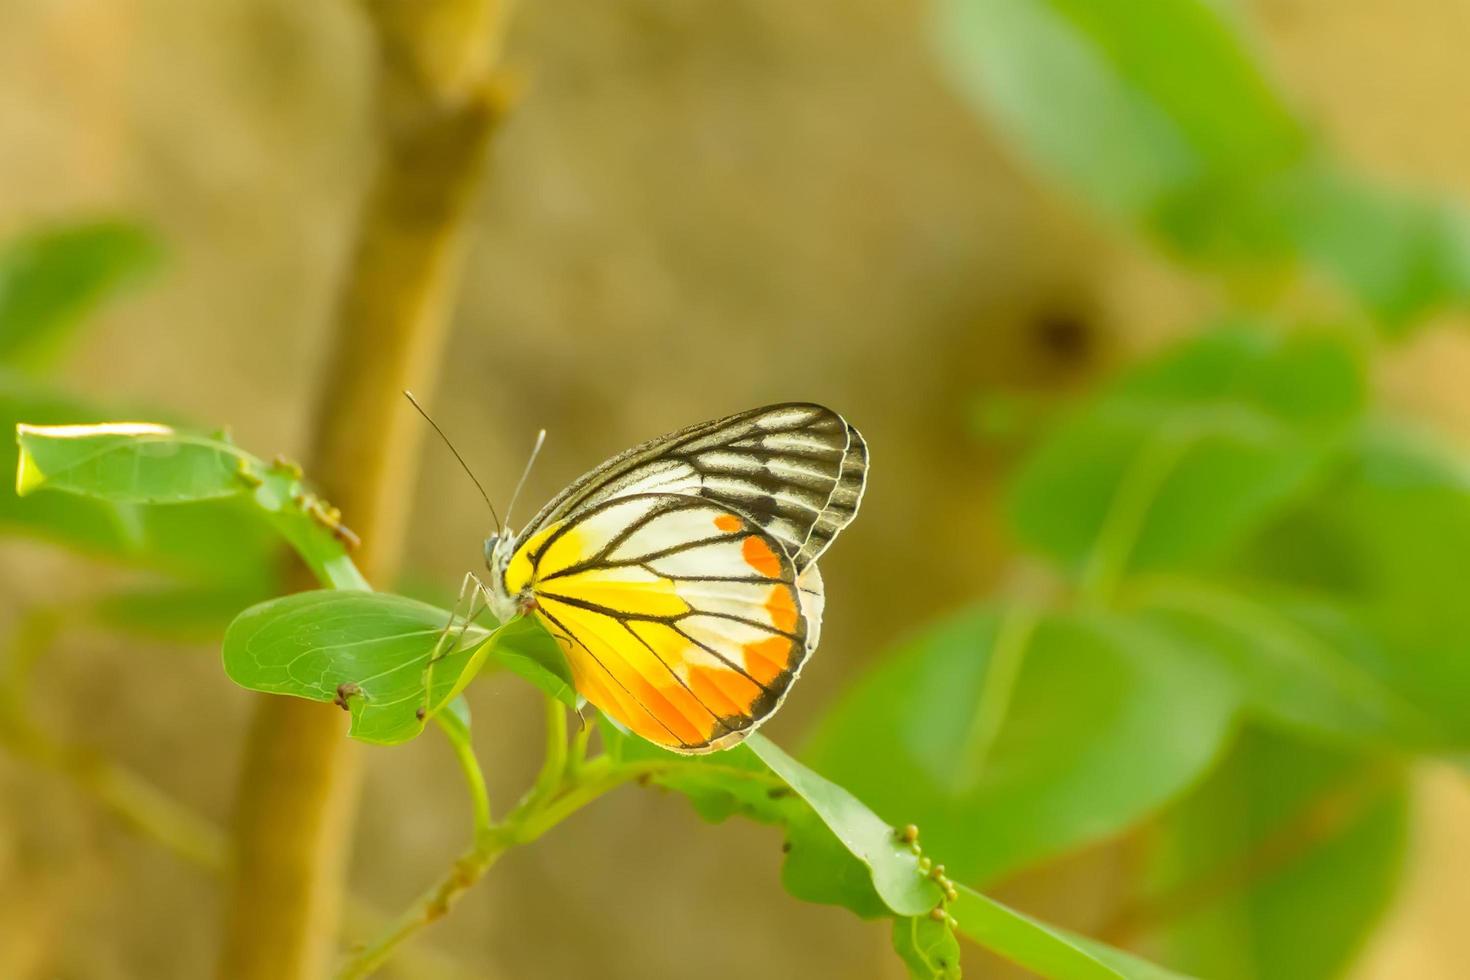 Butterfly in nuture, its makes a refreshing feeling. photo